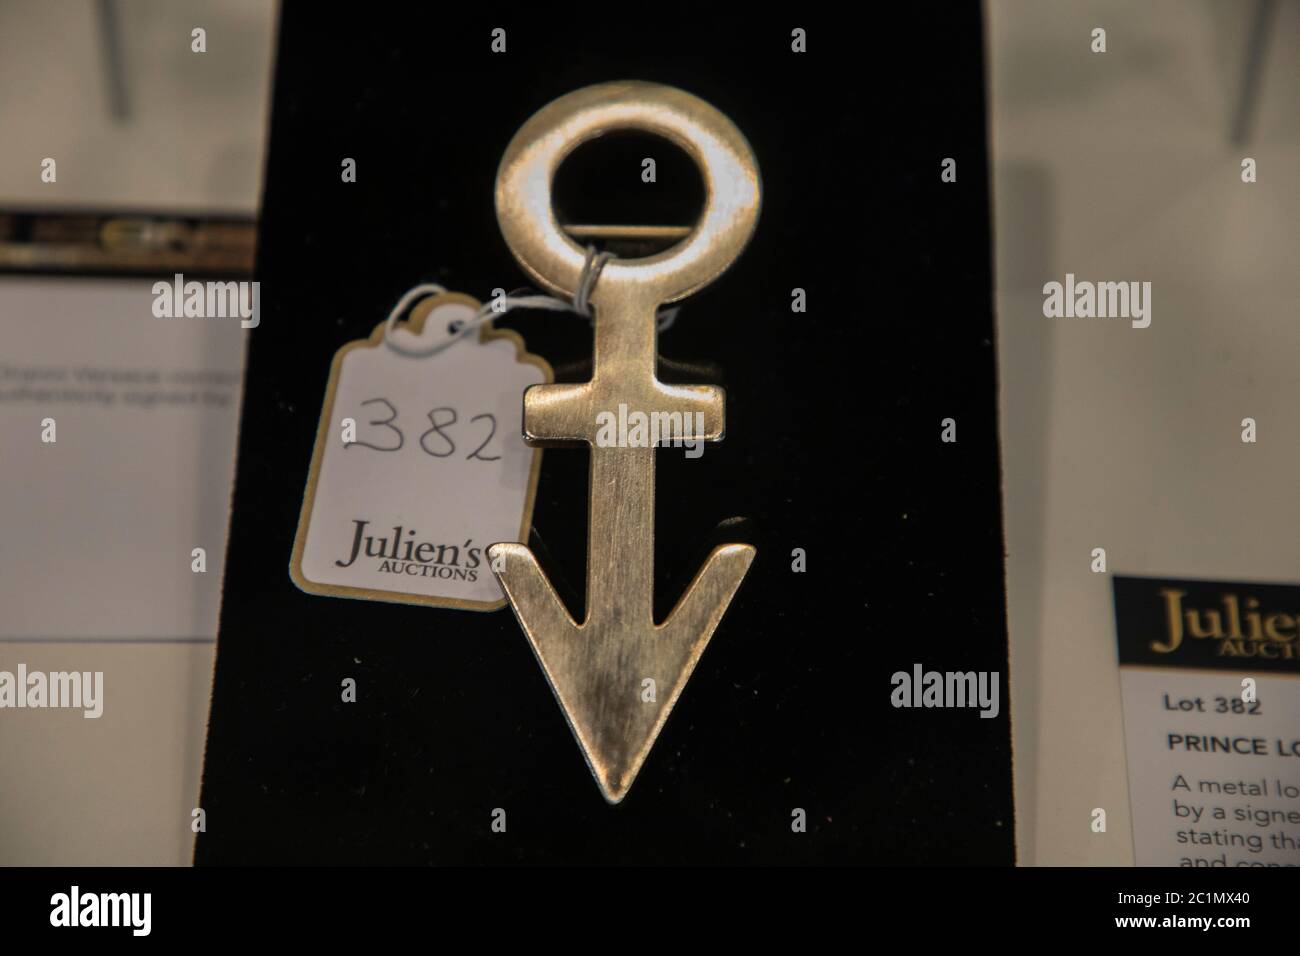 Beverly Hills, USA. 15th June, 2020. Prince love symbol bet buckle. Music Icons auction preview at JulienÕs Auctions. Hundreds of instruments, clothing, and curios owned by popular music icons including Prince, Curt Cobain, Elvis, Whitney Houston, Lady Gaga, and many more. 6/15/2020 Beverly Hills, CA USA (Photo by Ted Soqui/SIPA USA) Credit: Sipa USA/Alamy Live News Stock Photo